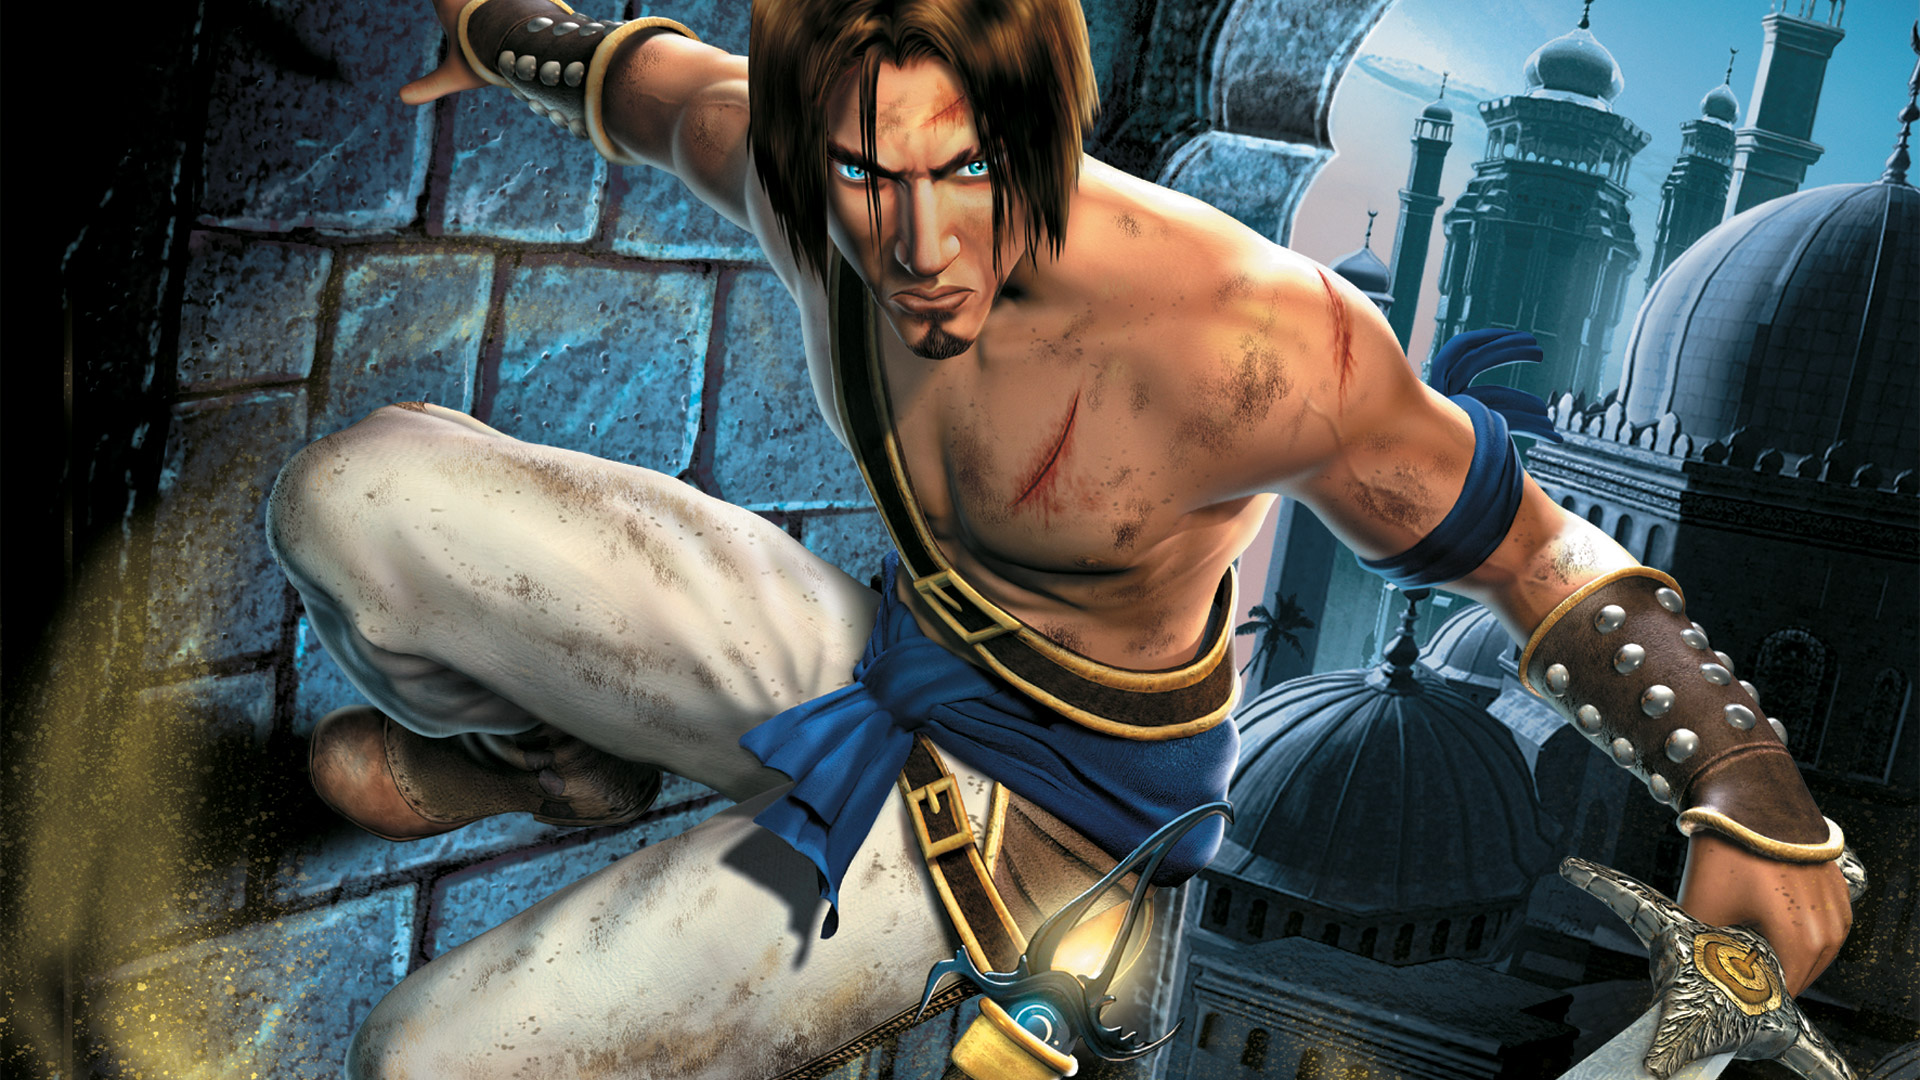 Prince of Persia - The Sands of Time trilogy - Ancient World Magazine